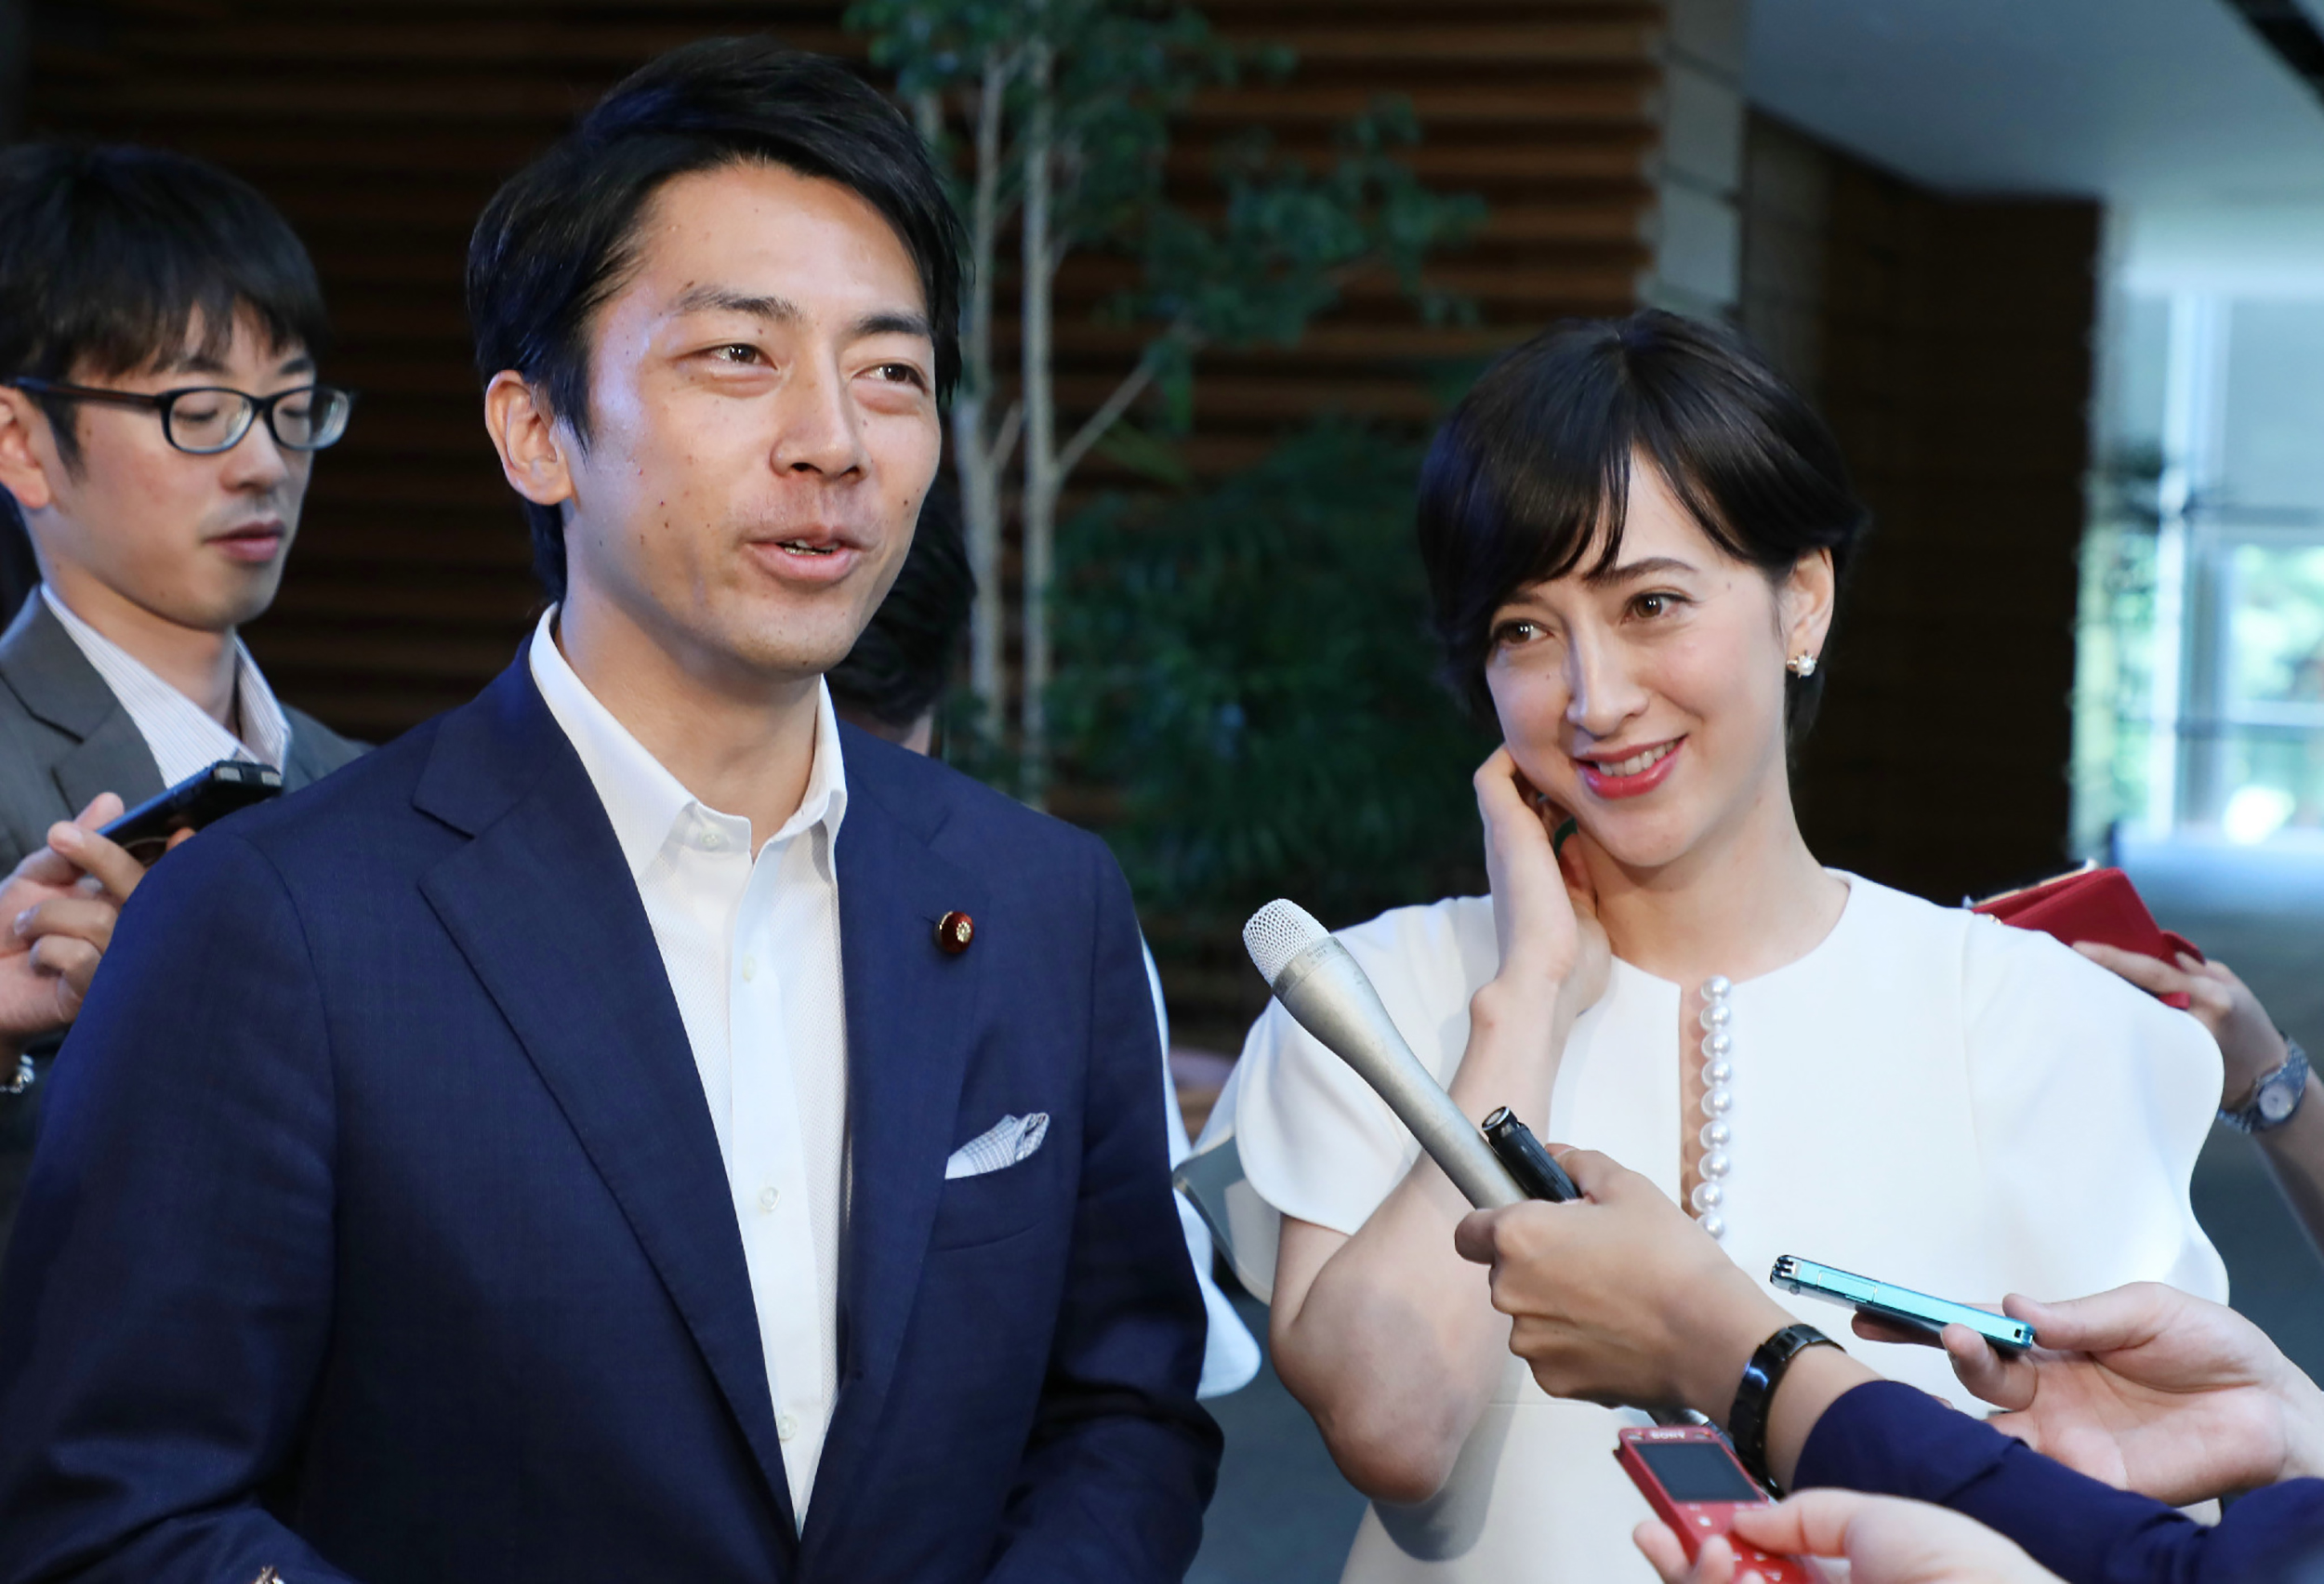  This Aug. 7, 2019 file picture shows Japan's Environment Minister Shinjiro Koizumi and his wife, television anchorwoman Christel Takigawa, in Tokyo. On Jan. 15, 2020, Koizumi said he would take paternity leave, the first by a serving cabinet minister.